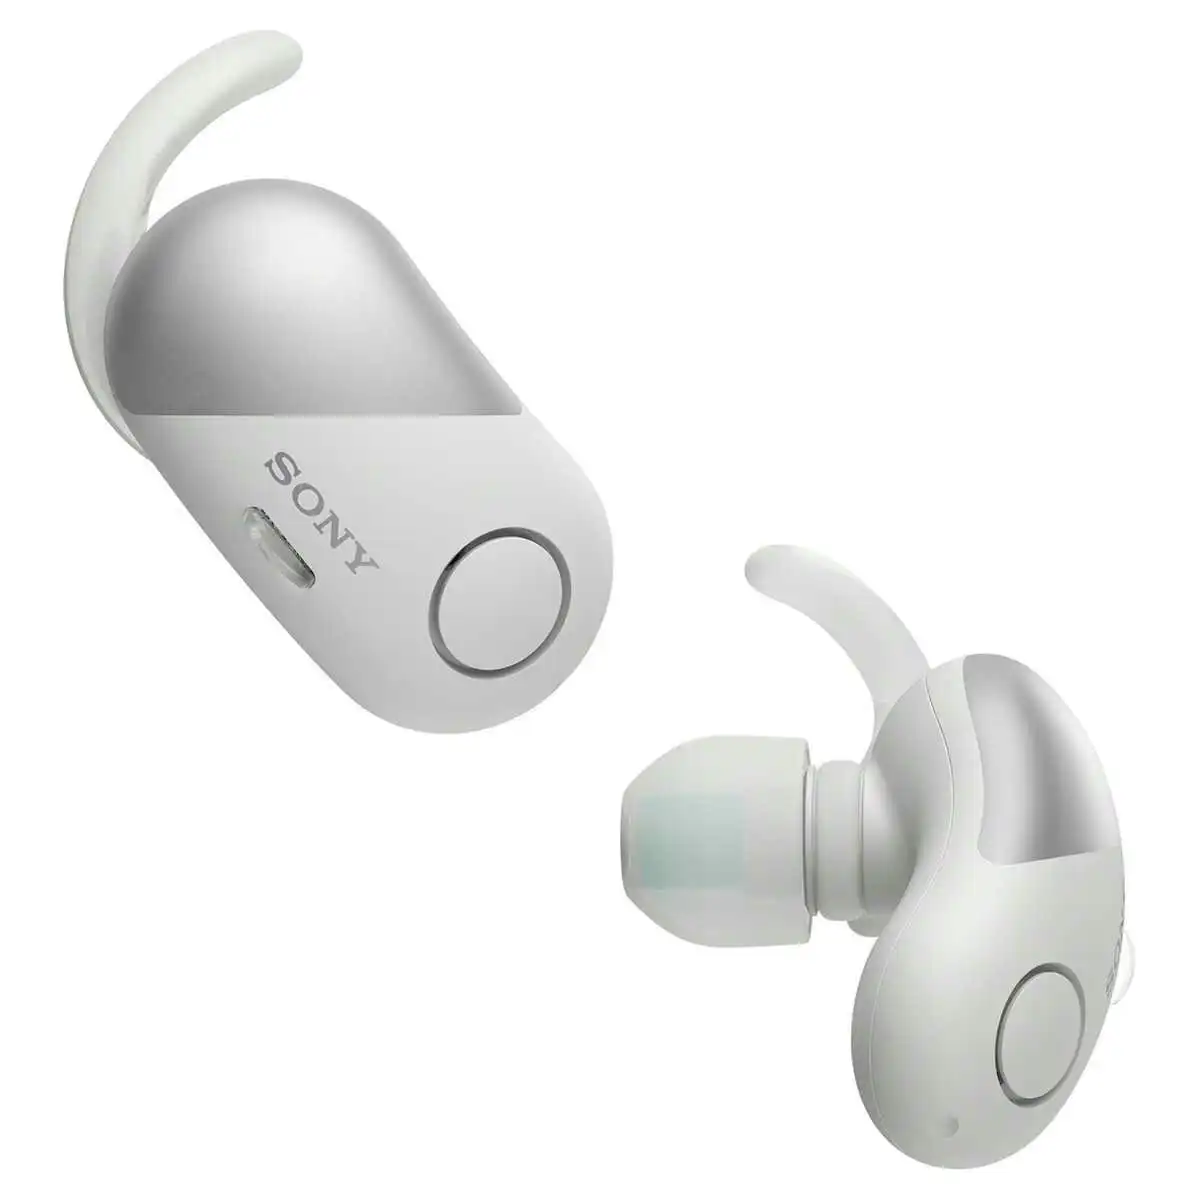 Sony Wireless Noise Cancelling Bluetooth In Ear Headphones White